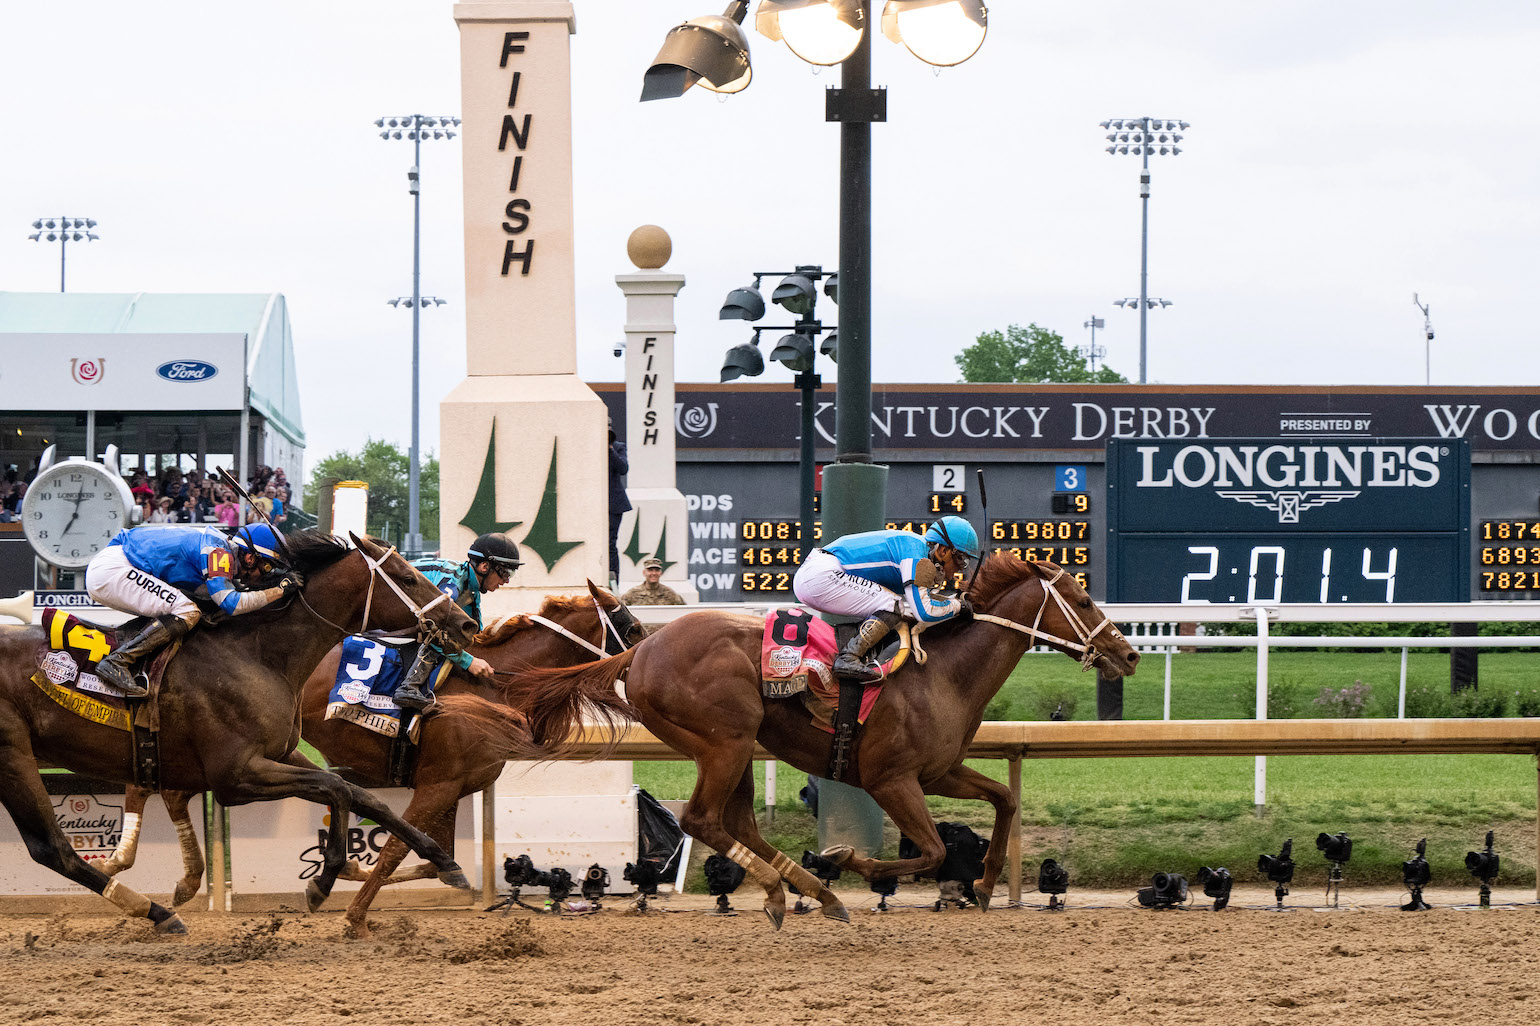 Longines times the Kentucky Derby 